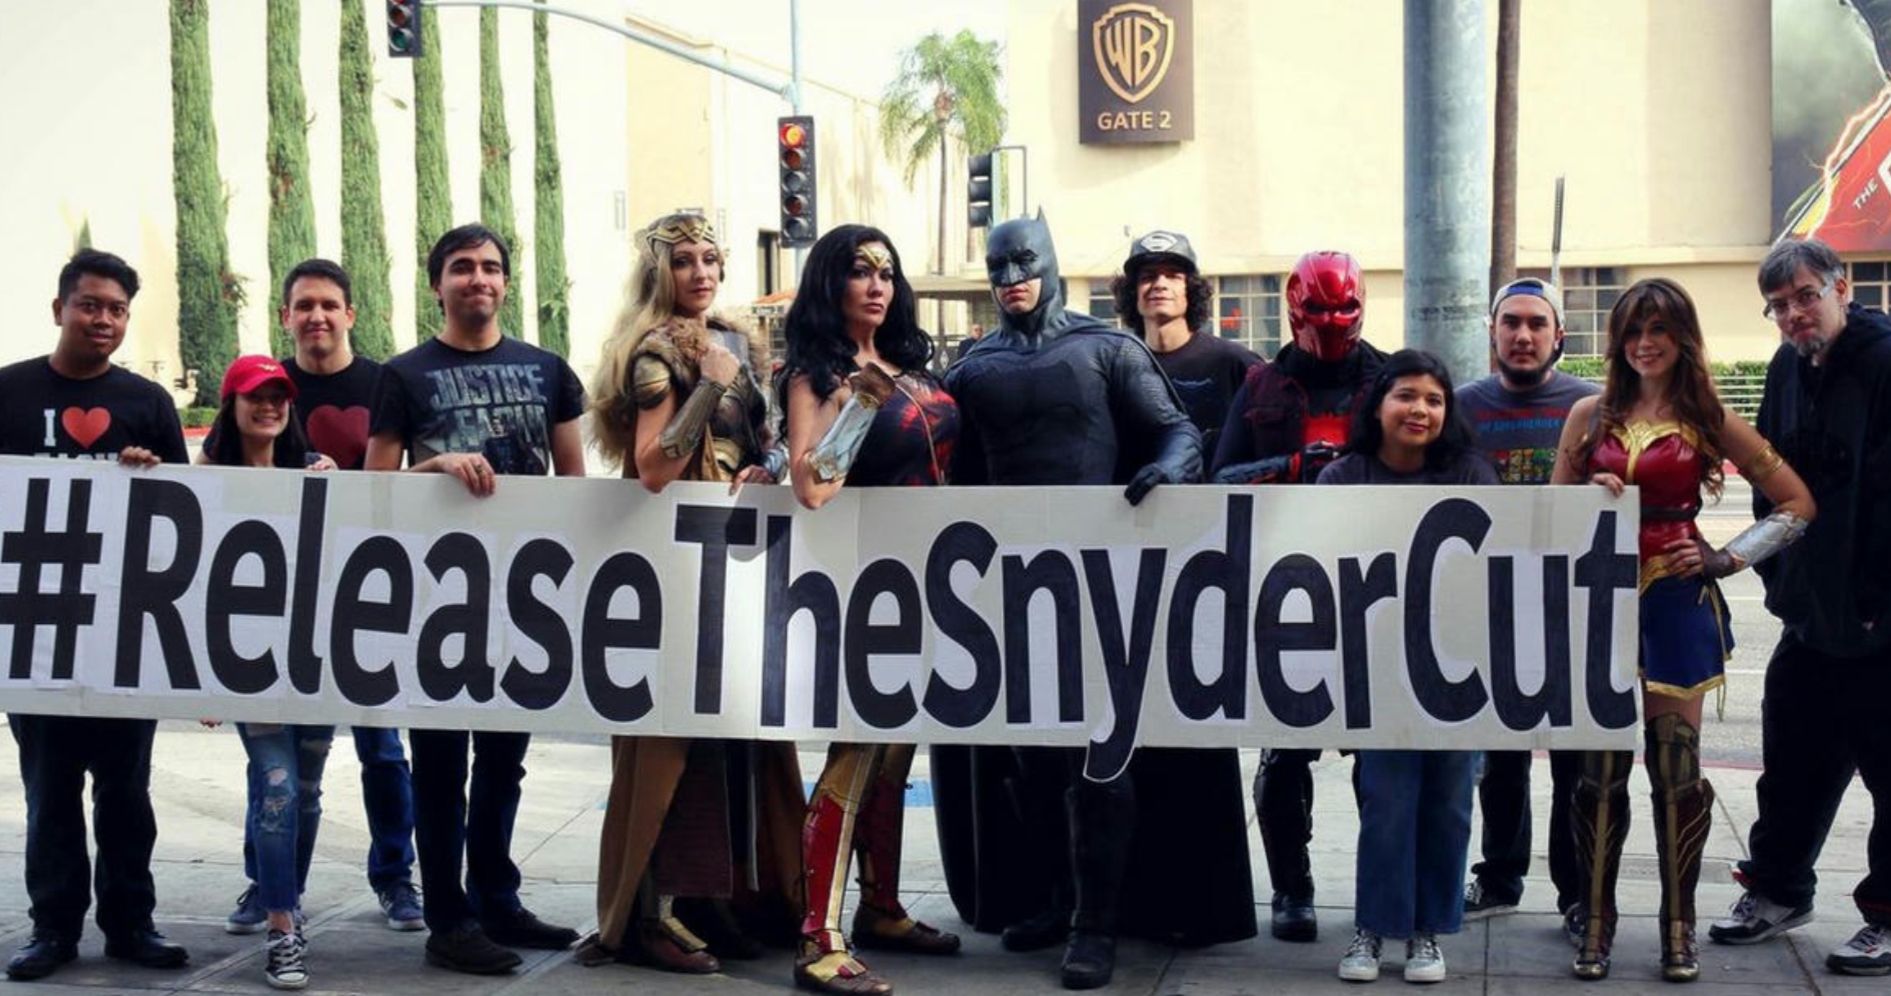 Zack Snyder Thanks Justice League Fans for All the #ReleaseTheSnyderCut Support